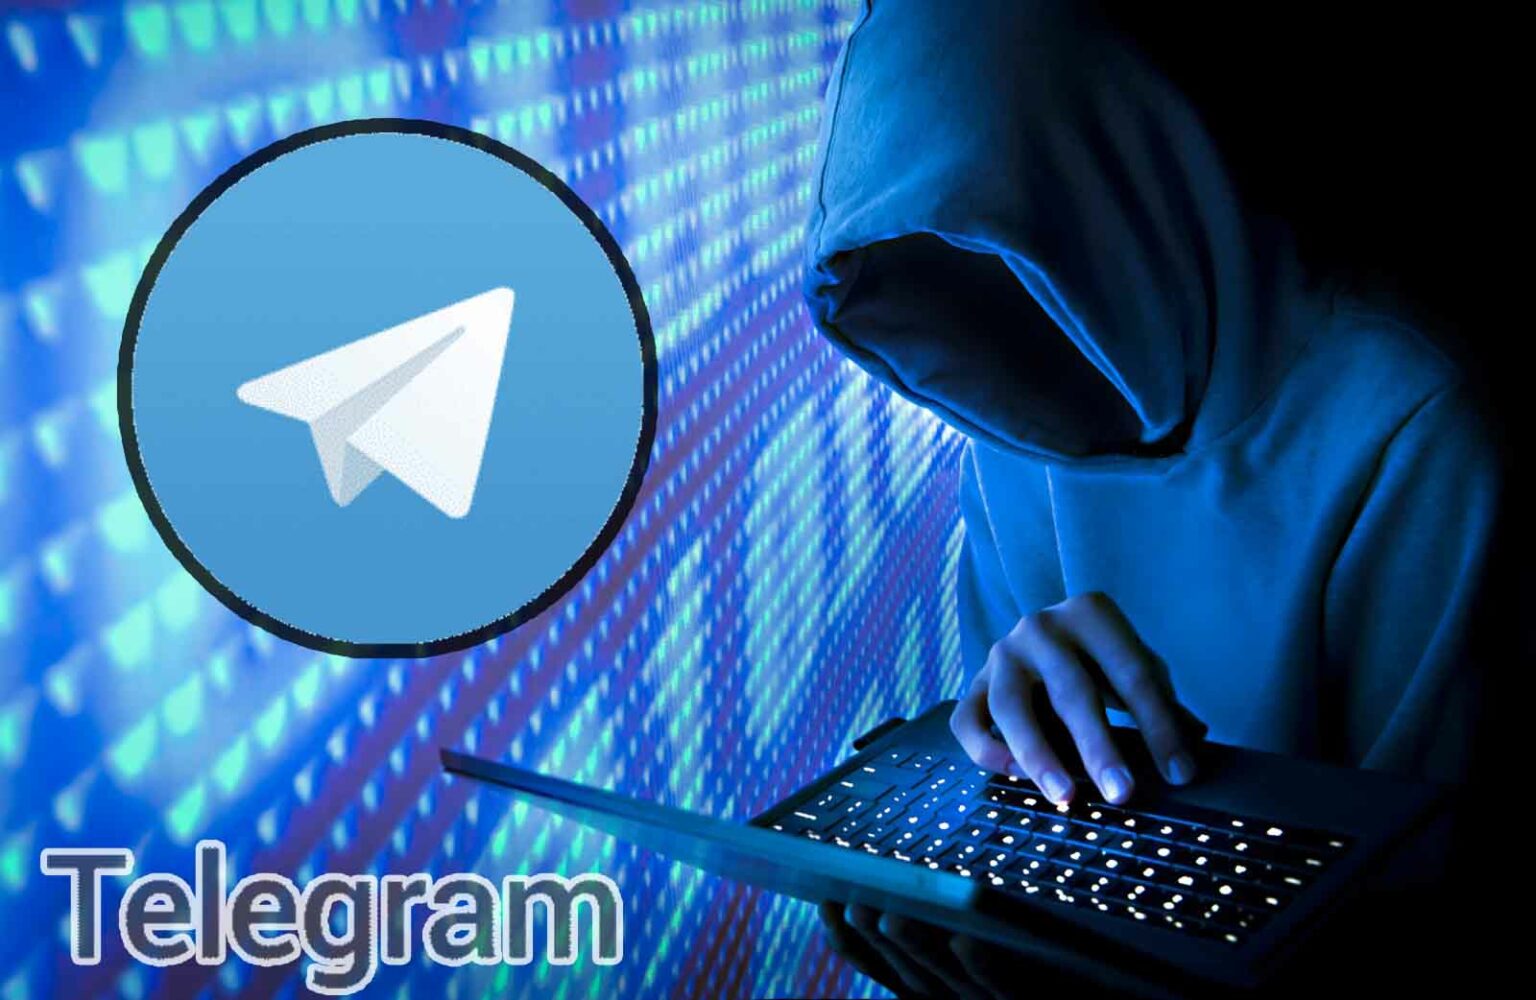 takian.ir telegram becomes viable alternative to the dark web heres how attackers are exploiting it 1